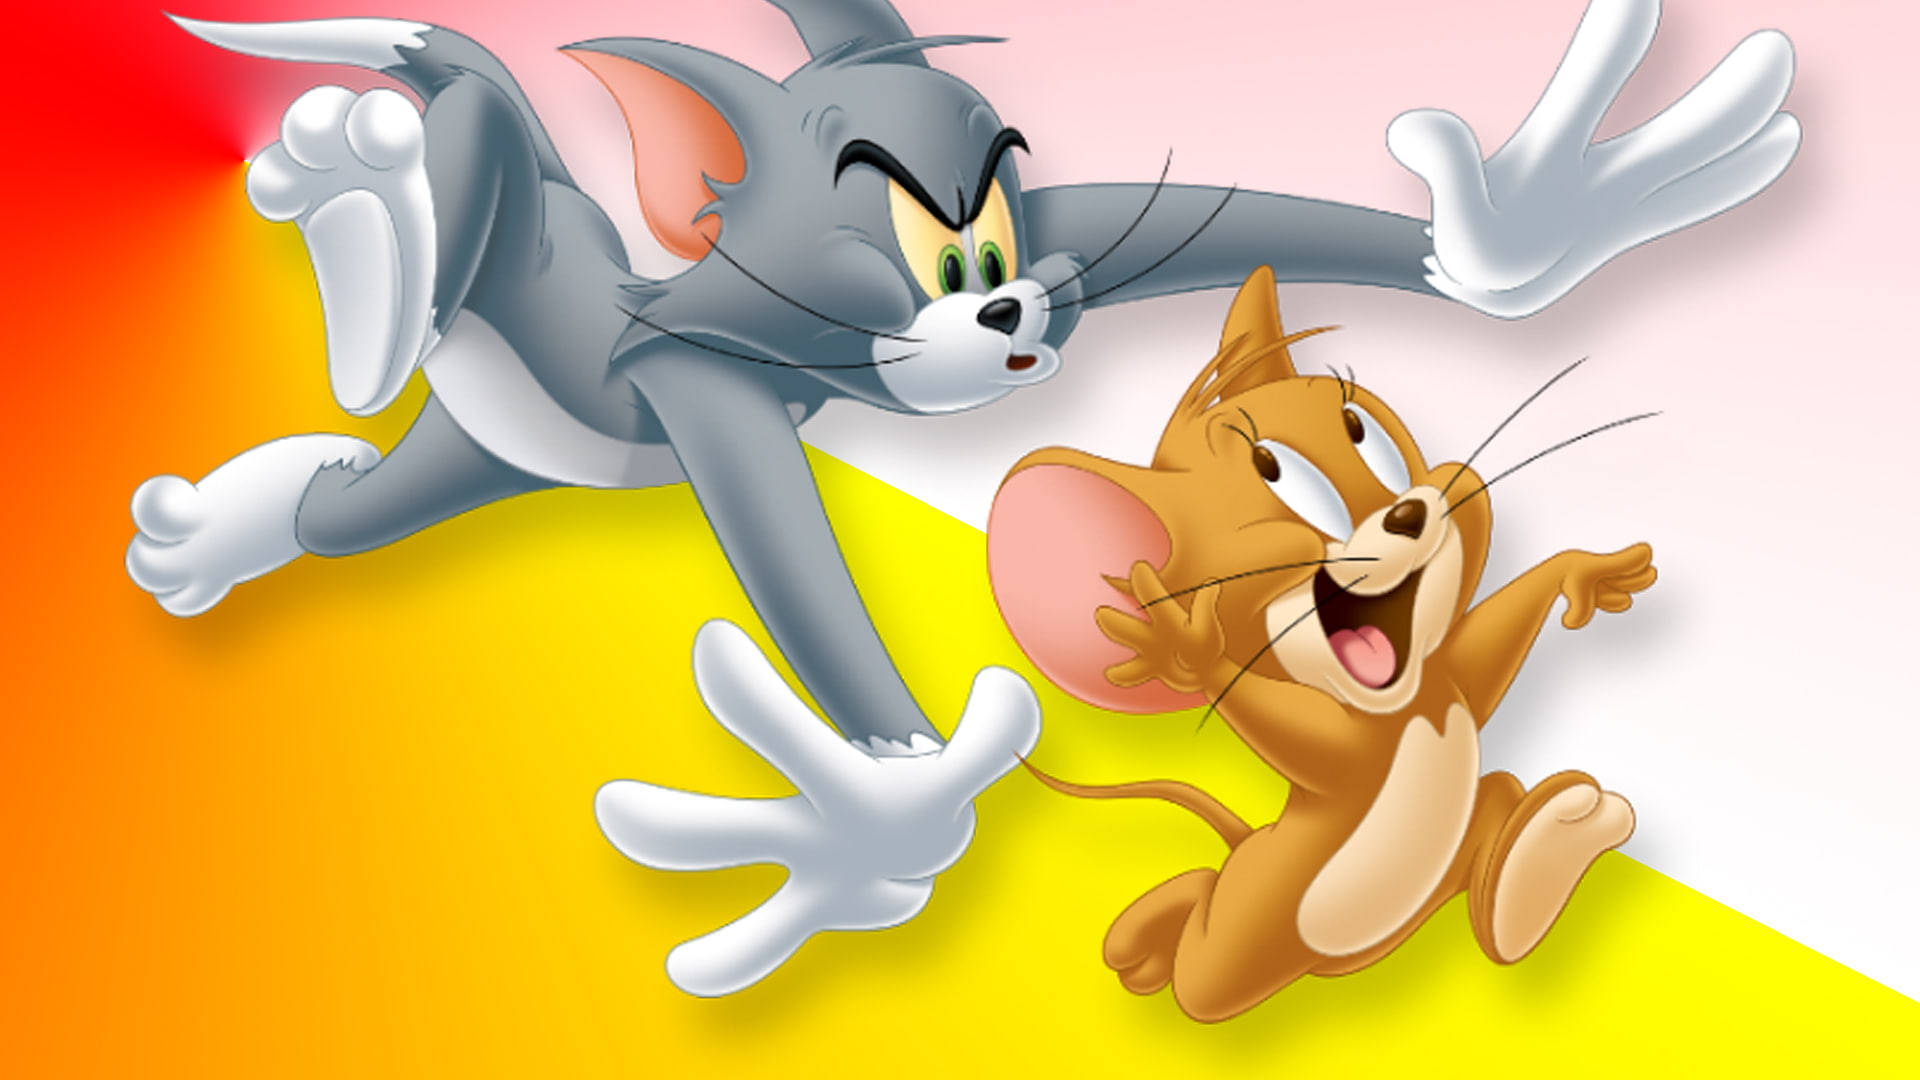 The iconic chase shown, tom chasing jerry